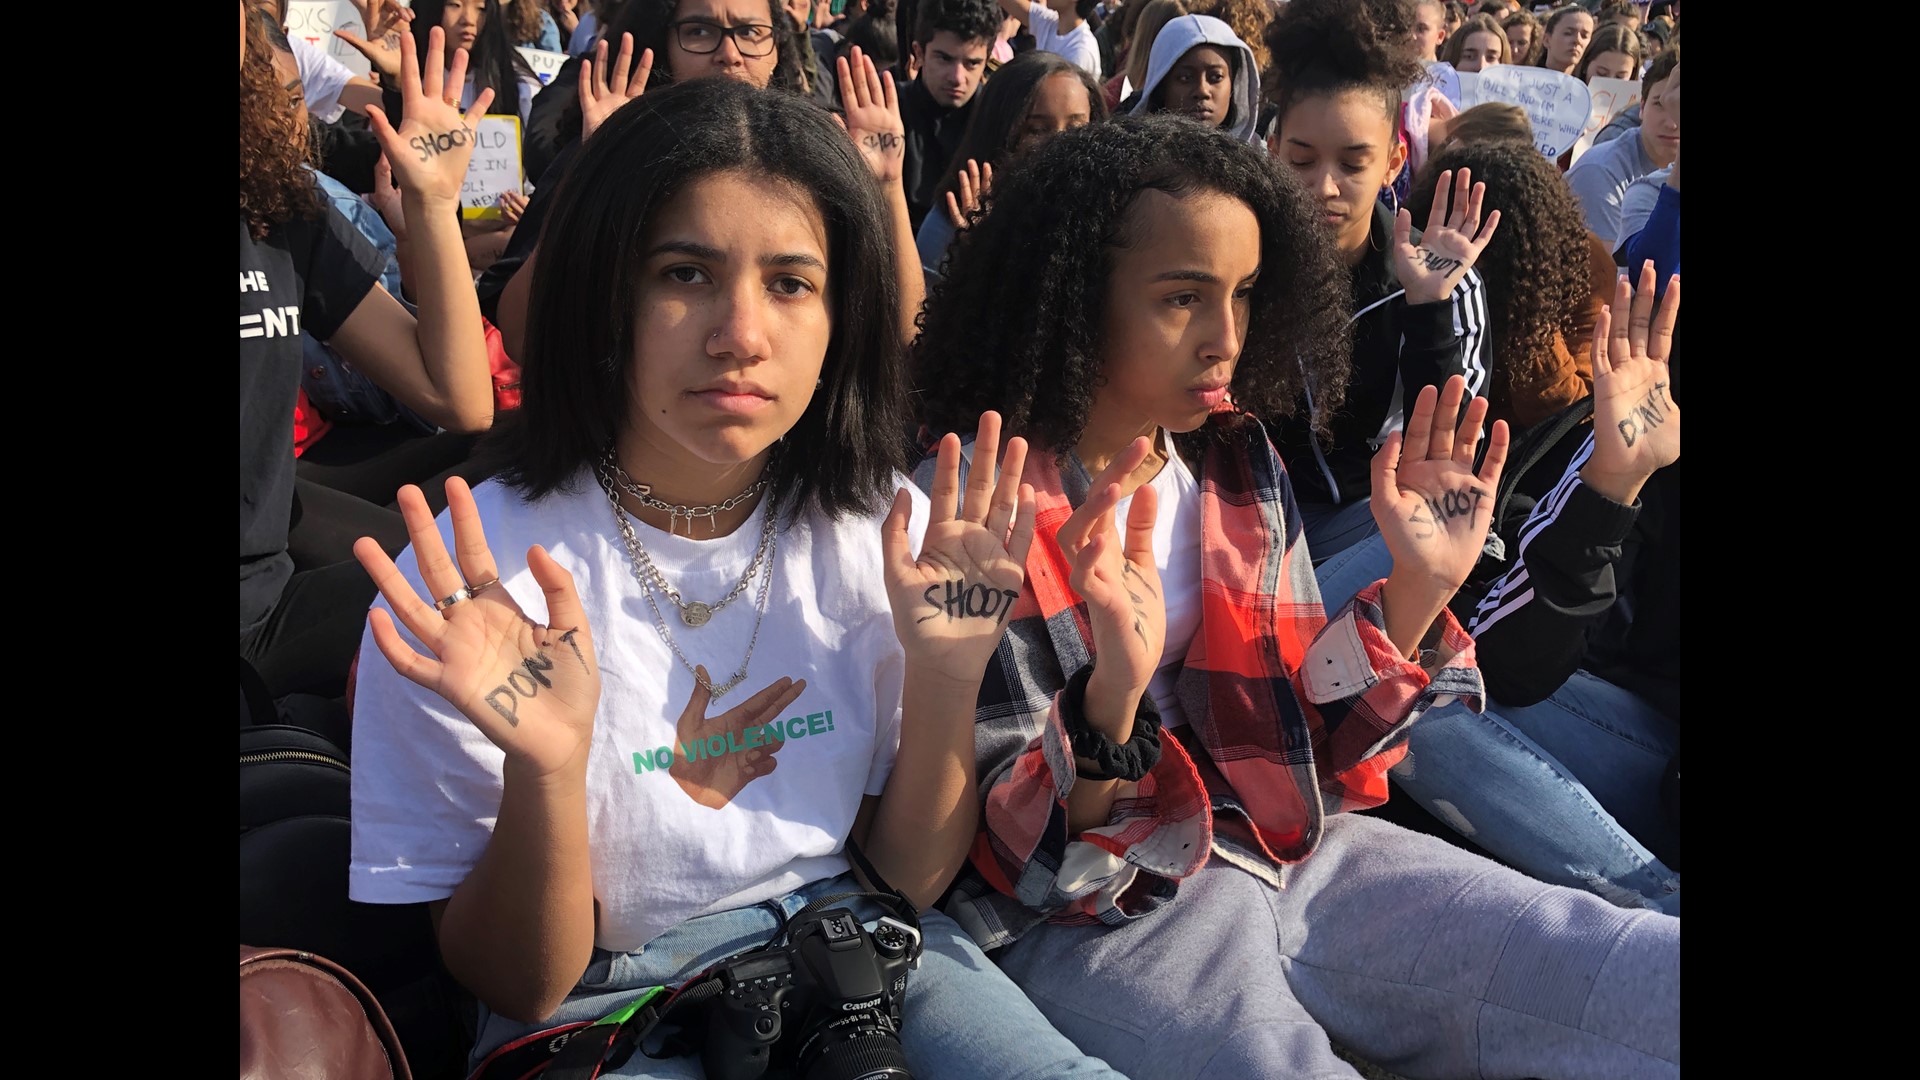 Following the shooting at Stoneman Douglas High School the student activists were called paid actors and their motives for speaking out were questioned. Ariane Datil asked some local student protesters participating in National Student Walkout Day if they were concerned about being perceived that way.